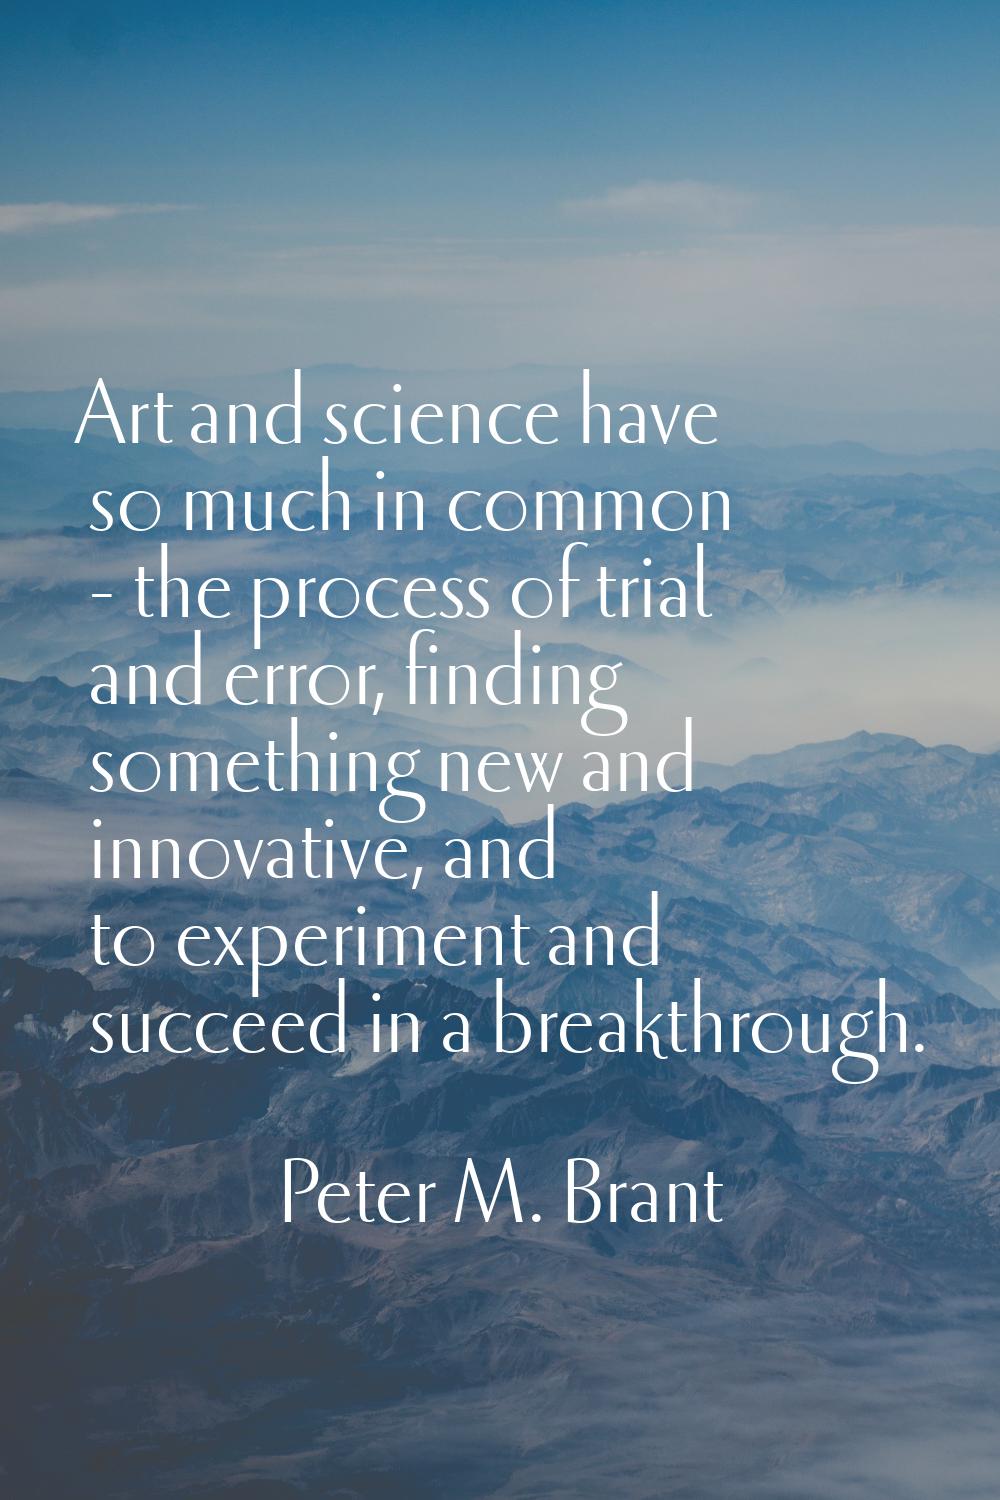 Art and science have so much in common - the process of trial and error, finding something new and 